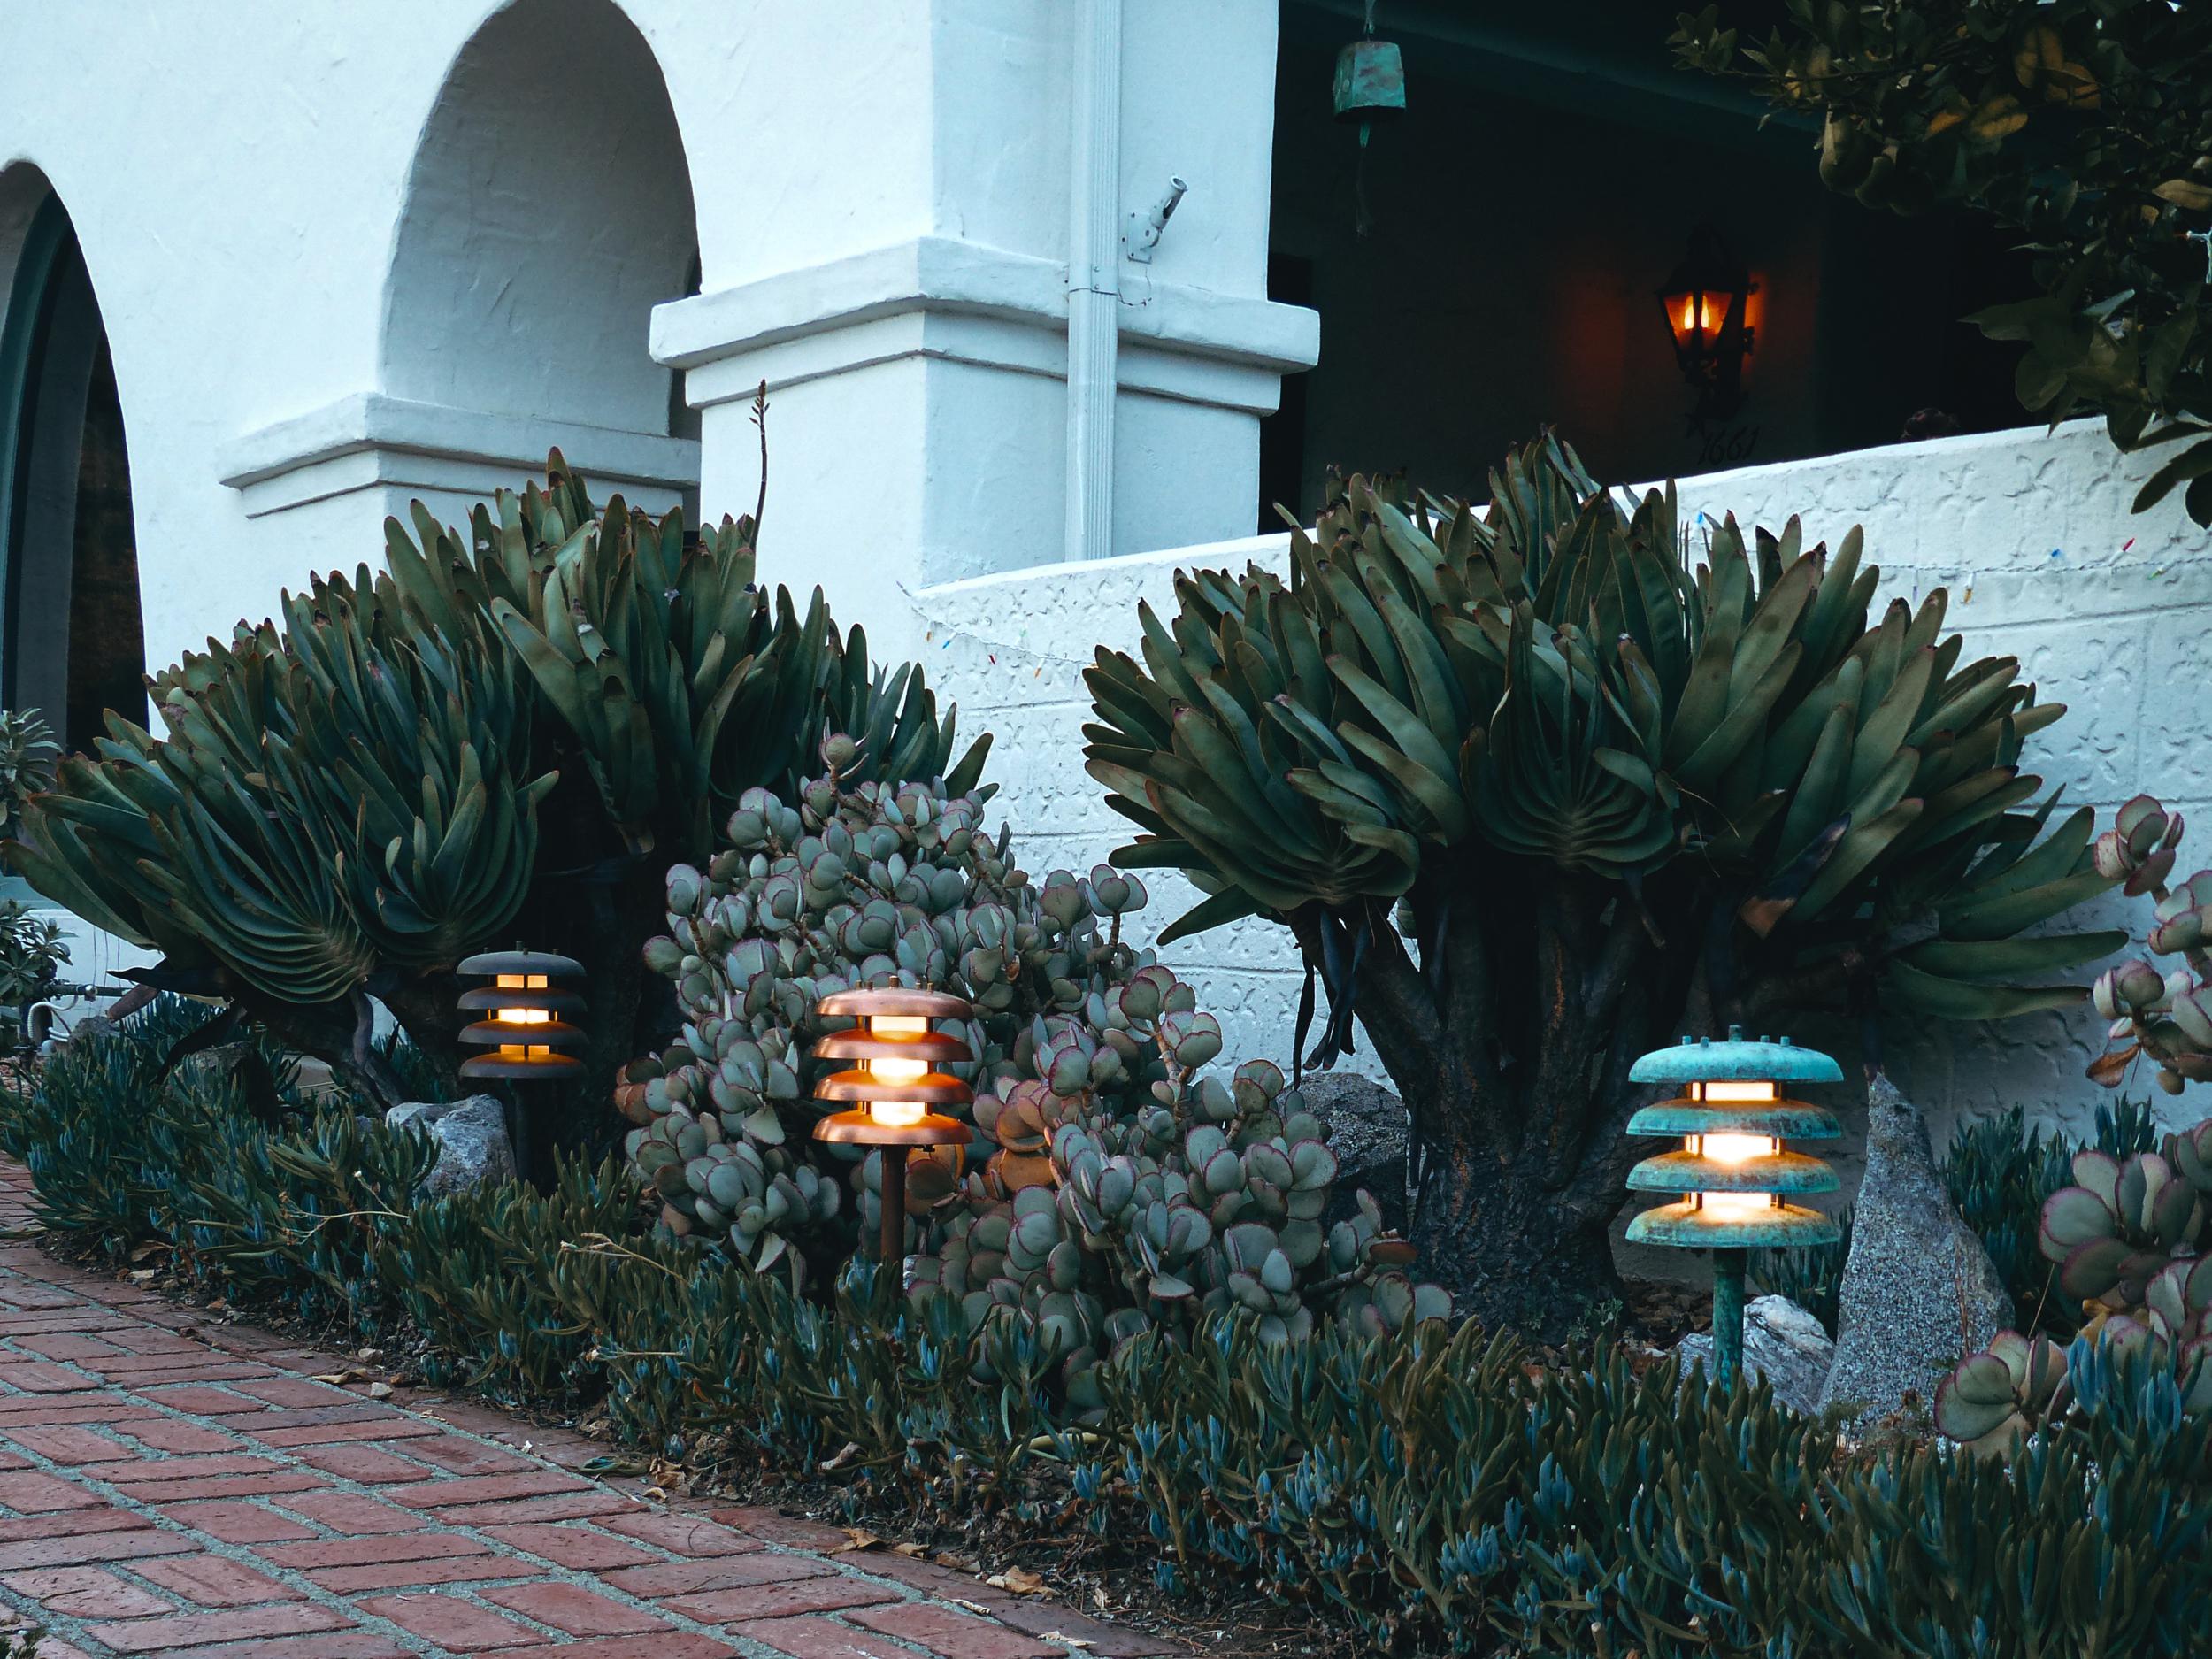 Two Enlighten 'Gibson' Outdoor Bollard Light in Raw Copper. Executed in raw unlacquered and unpolished copper. A highly refined fixture reminiscent of the designs of Poul Henningsen that brings bold, sculptural, yet glare-free illumination to